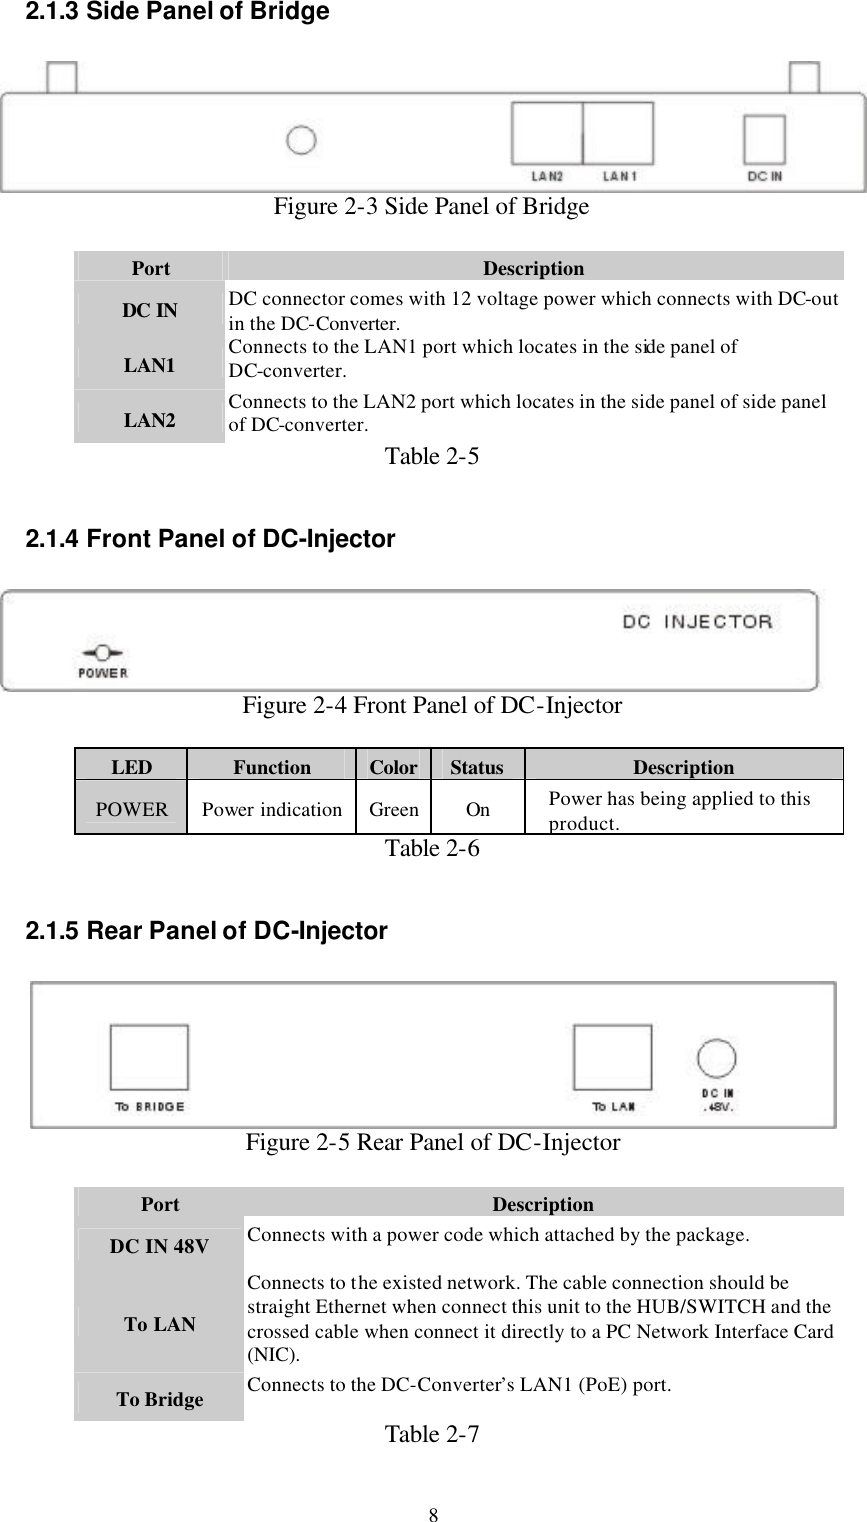  8 2.1.3 Side Panel of Bridge   Figure 2-3 Side Panel of Bridge  Port Description DC IN DC connector comes with 12 voltage power which connects with DC-out in the DC-Converter. LAN1 Connects to the LAN1 port which locates in the side panel of DC-converter. LAN2 Connects to the LAN2 port which locates in the side panel of side panel of DC-converter. Table 2-5  2.1.4 Front Panel of DC-Injector   Figure 2-4 Front Panel of DC-Injector  LED Function Color Status Description POWER Power indication Green On Power has being applied to this product. Table 2-6  2.1.5 Rear Panel of DC-Injector   Figure 2-5 Rear Panel of DC-Injector  Port Description DC IN 48V Connects with a power code which attached by the package. To LAN Connects to the existed network. The cable connection should be straight Ethernet when connect this unit to the HUB/SWITCH and the crossed cable when connect it directly to a PC Network Interface Card (NIC). To Bridge Connects to the DC-Converter’s LAN1 (PoE) port. Table 2-7 